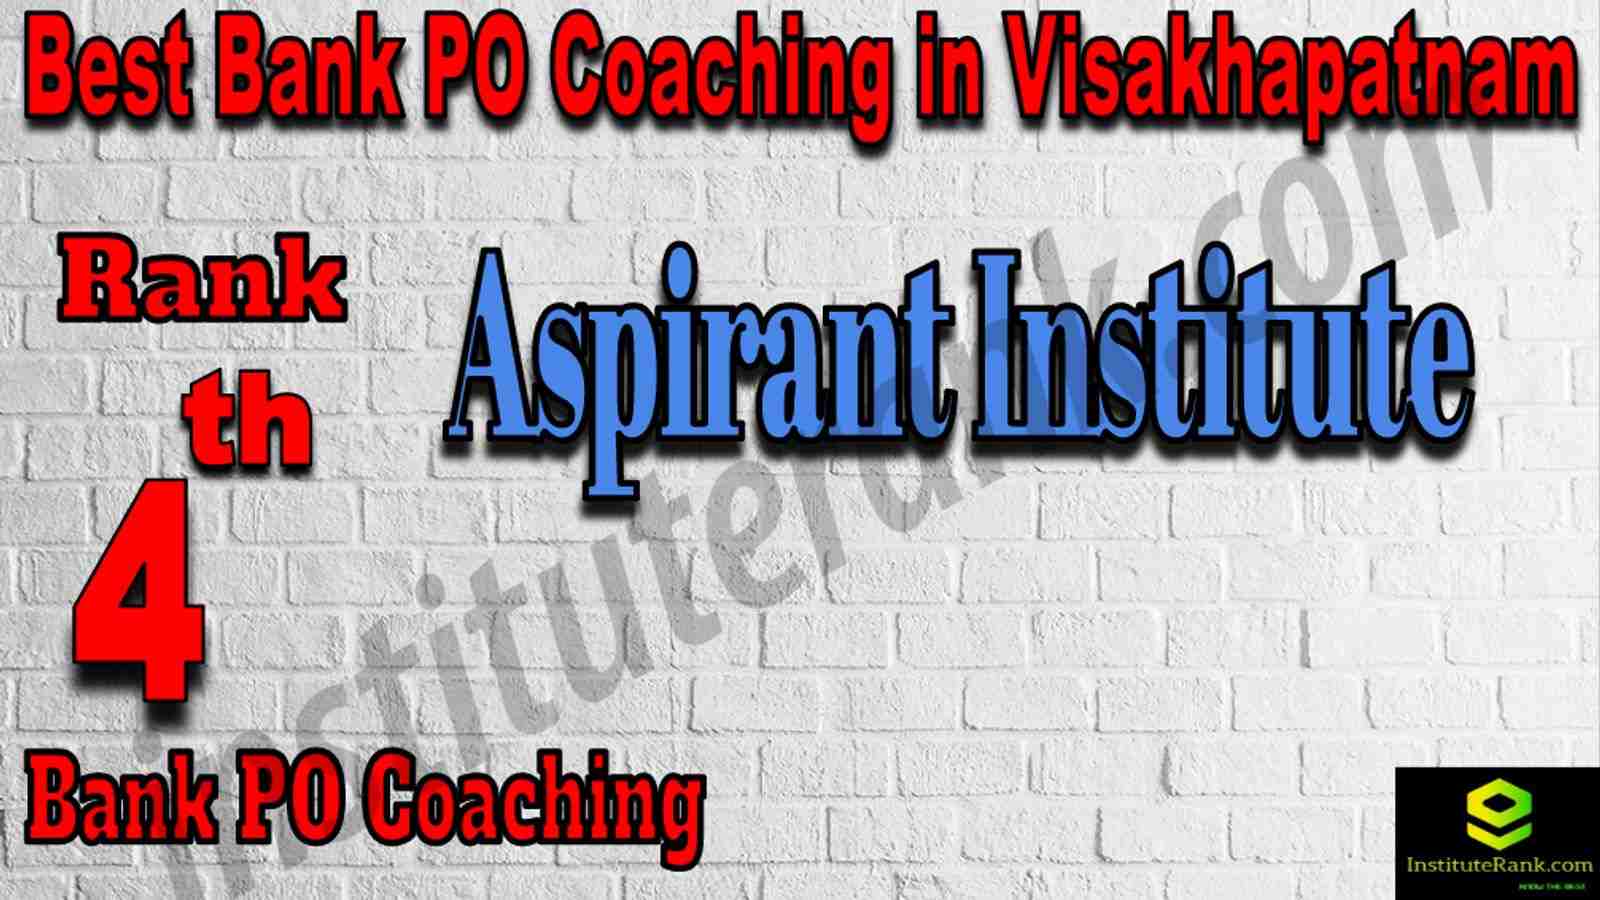 4th Best Bank PO Coaching in Visakhapatnam